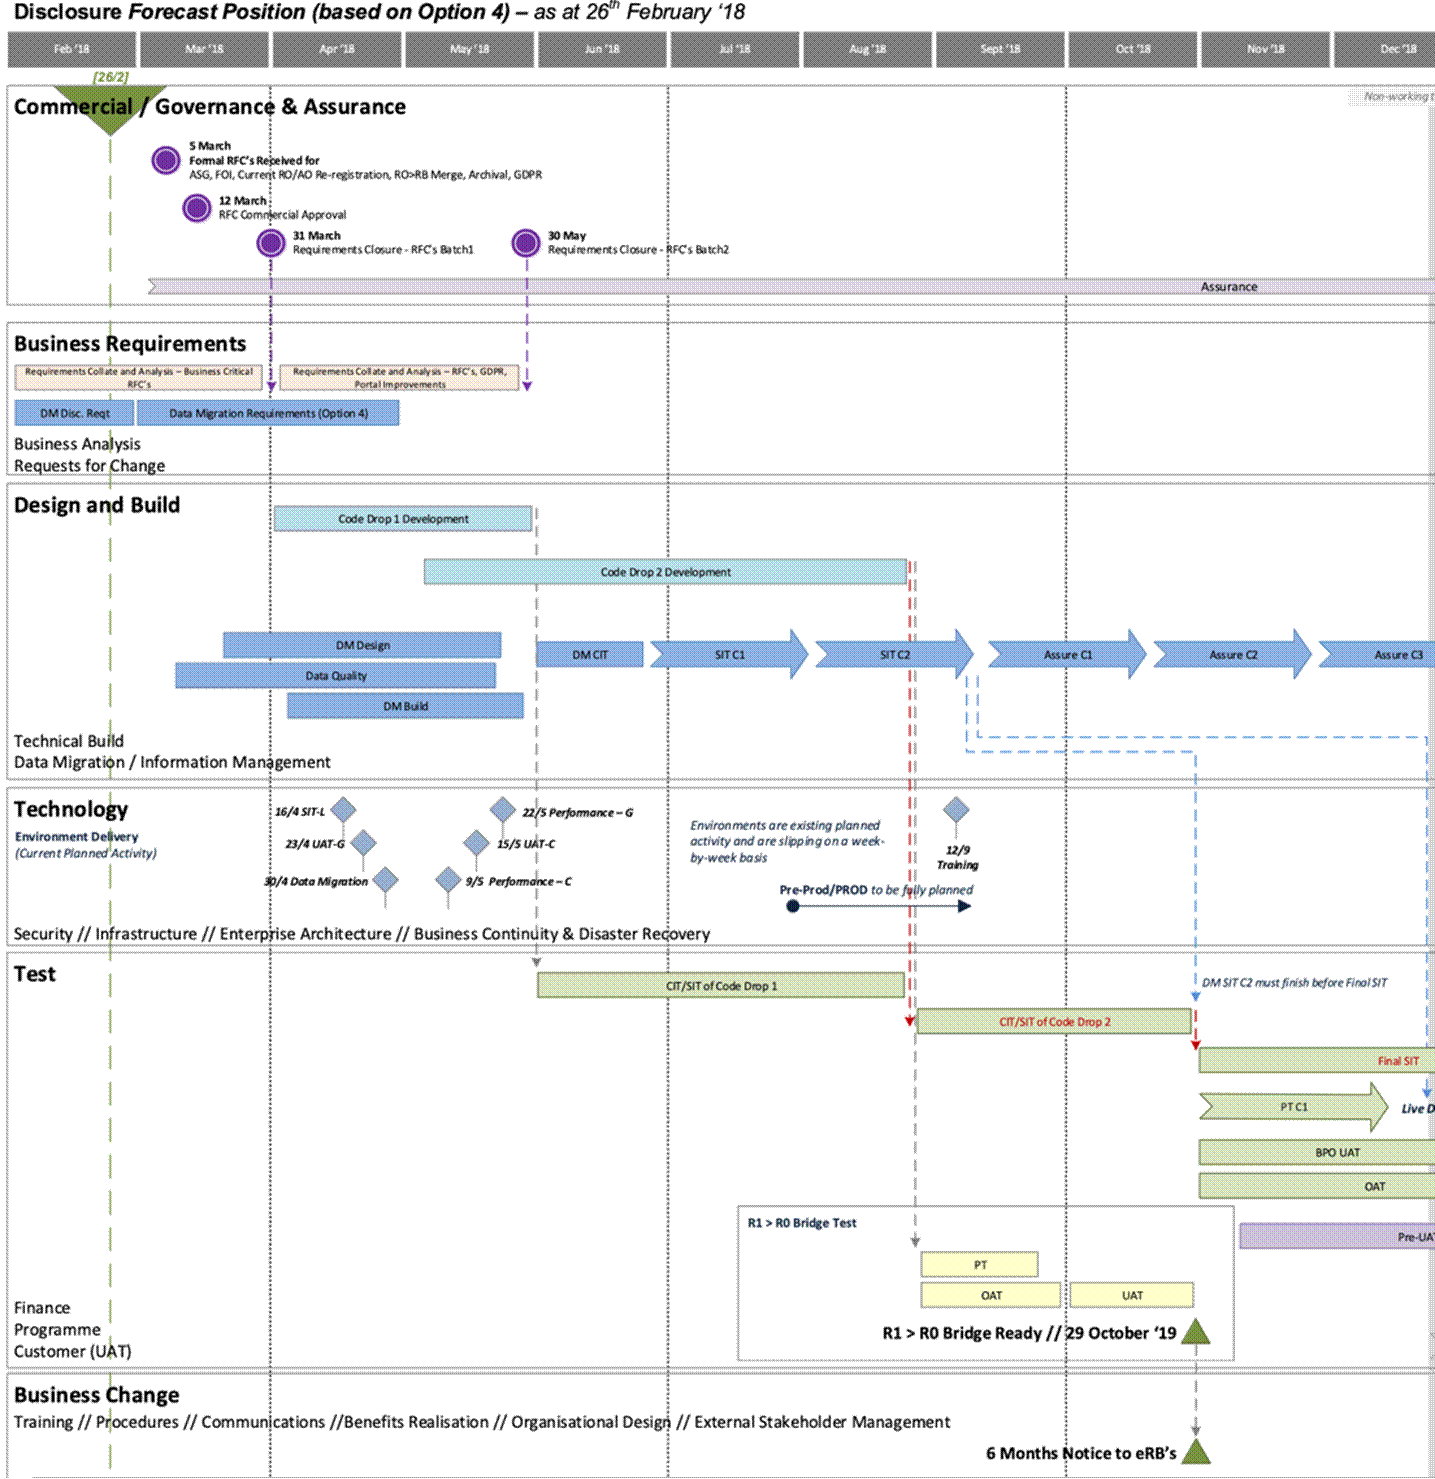 A screenshot of a project management diagram

Description automatically generated